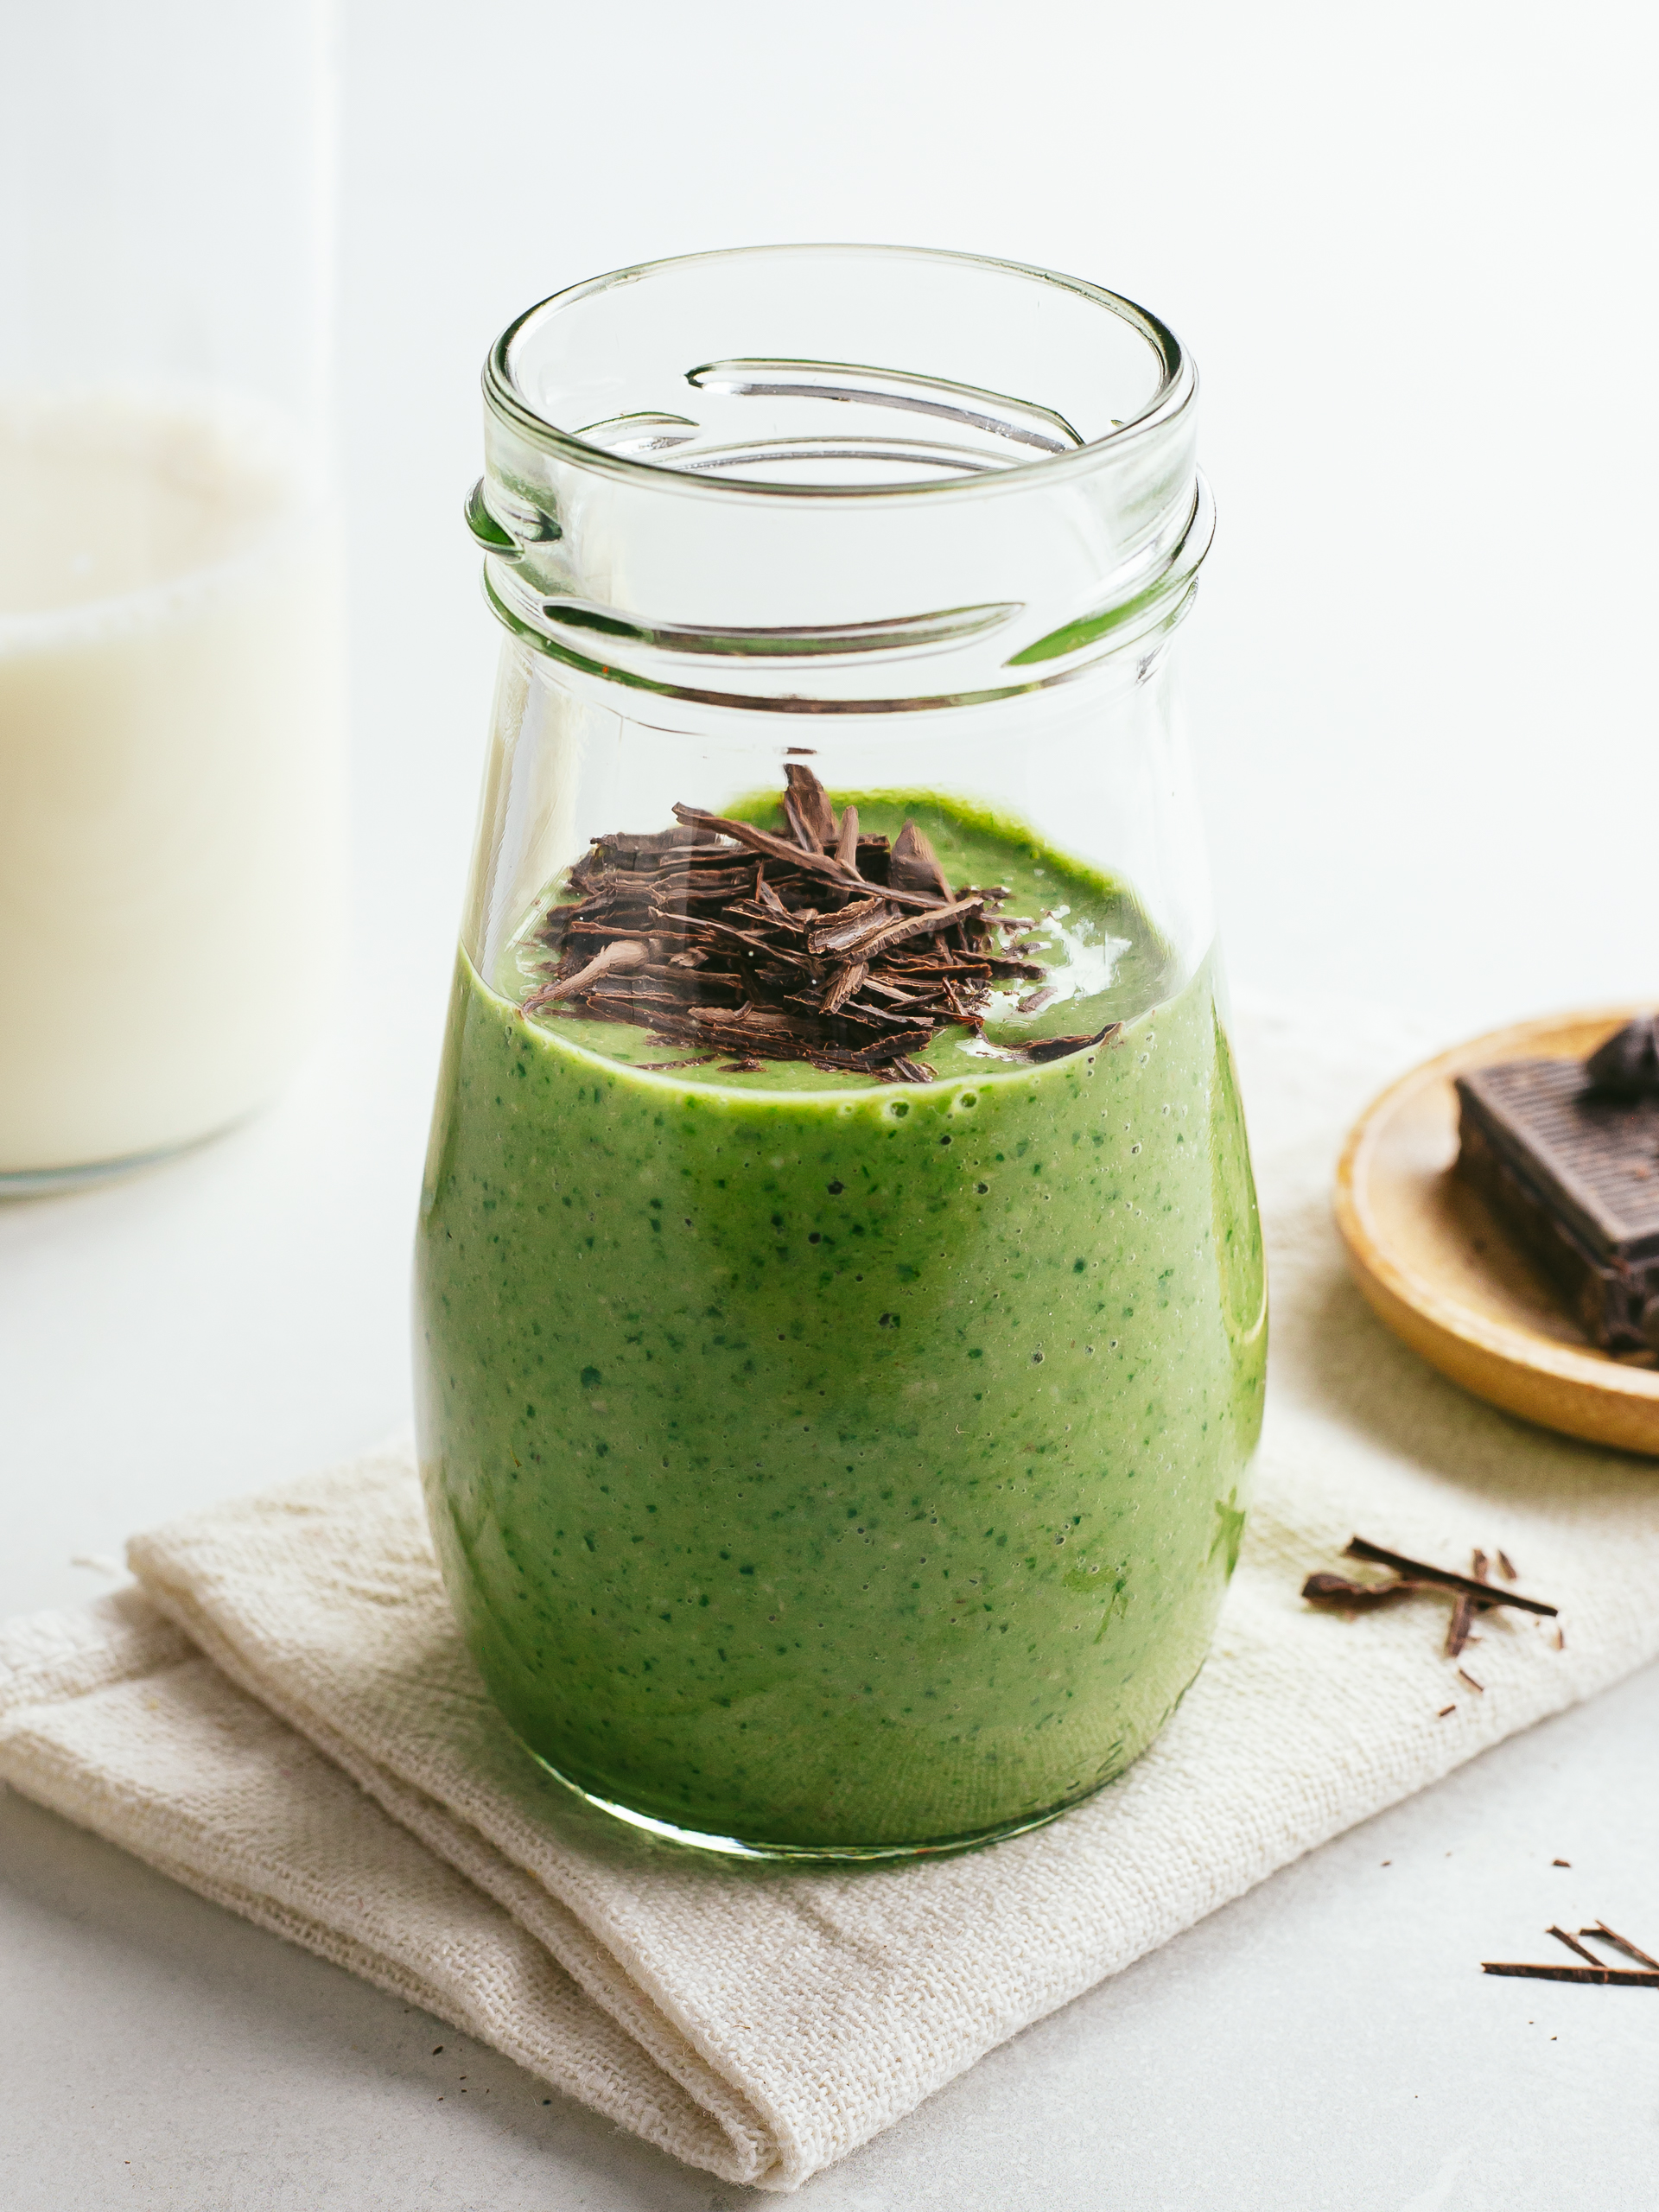 iron-boosting spinach smoothie in a jar with dark chocolate shavings